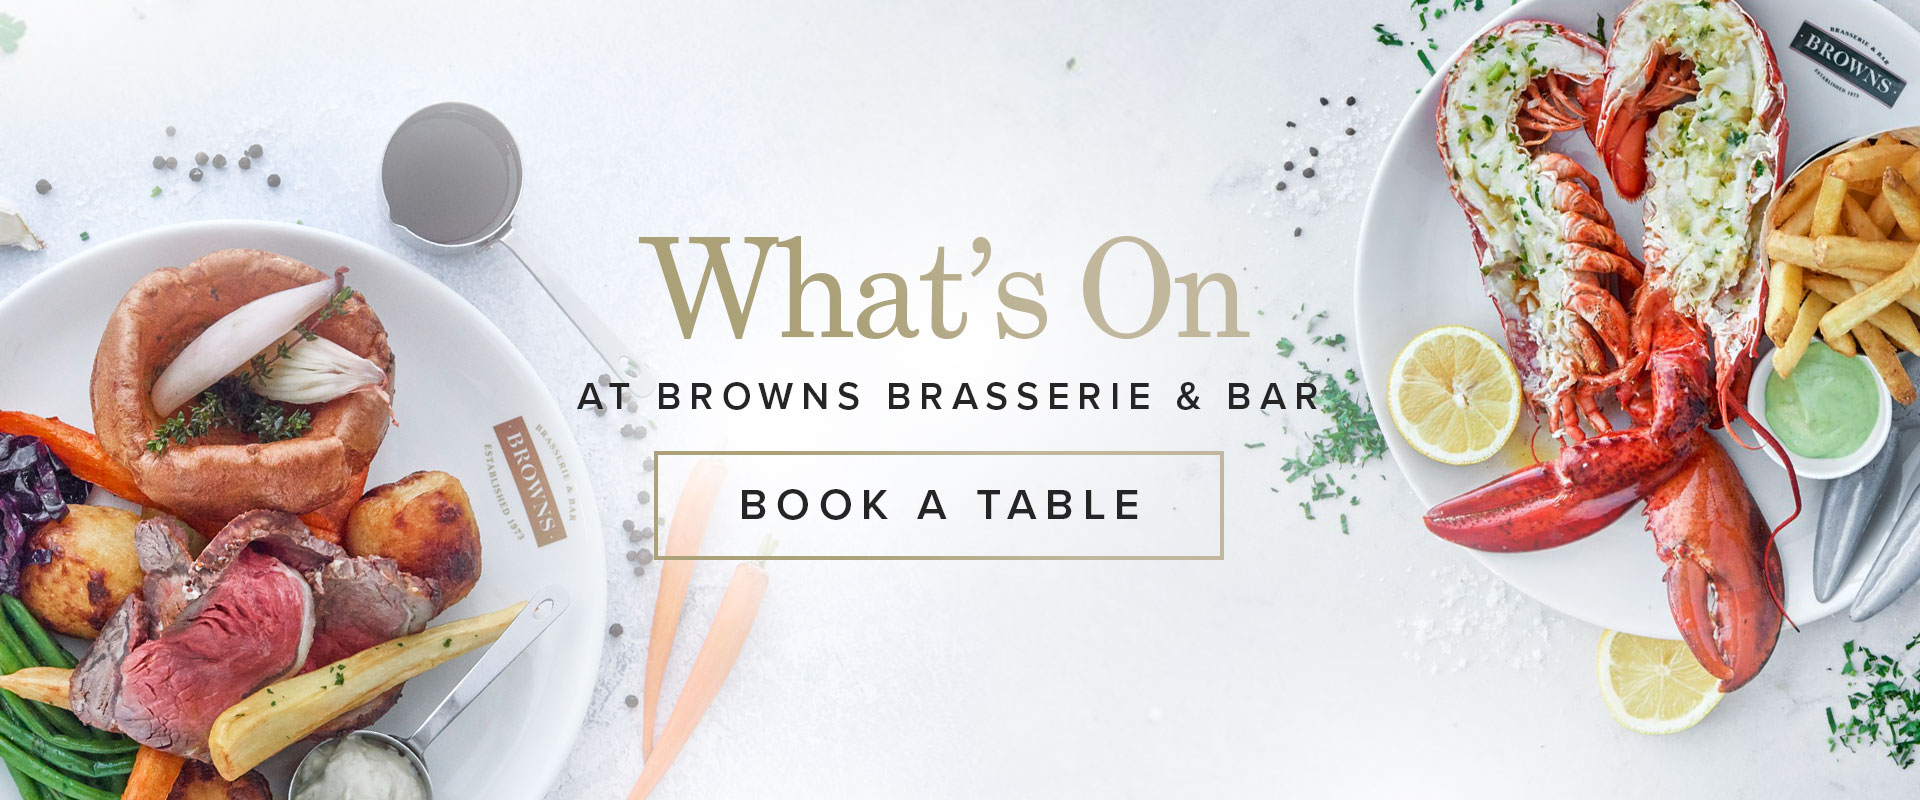 What's on at Browns Cambridge | Browns